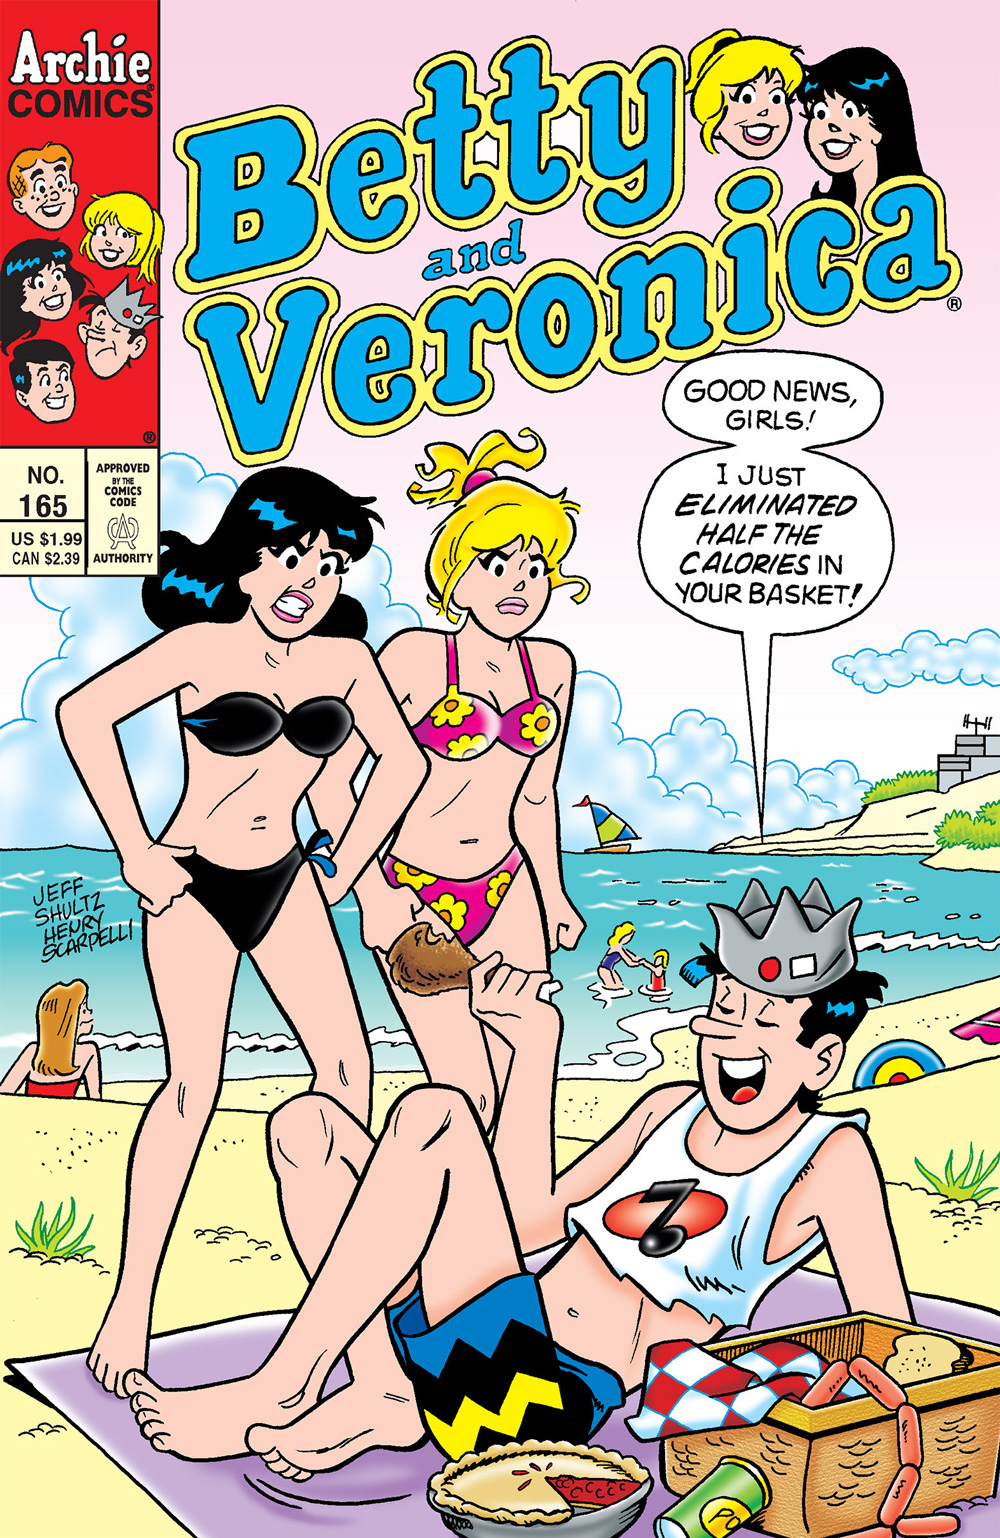 Jughead lays on the beach eating a chicken drumstick while Betty and Veronica look on angrily. He tells them he has good news: he just eliminated half the calories in their picnic basket.